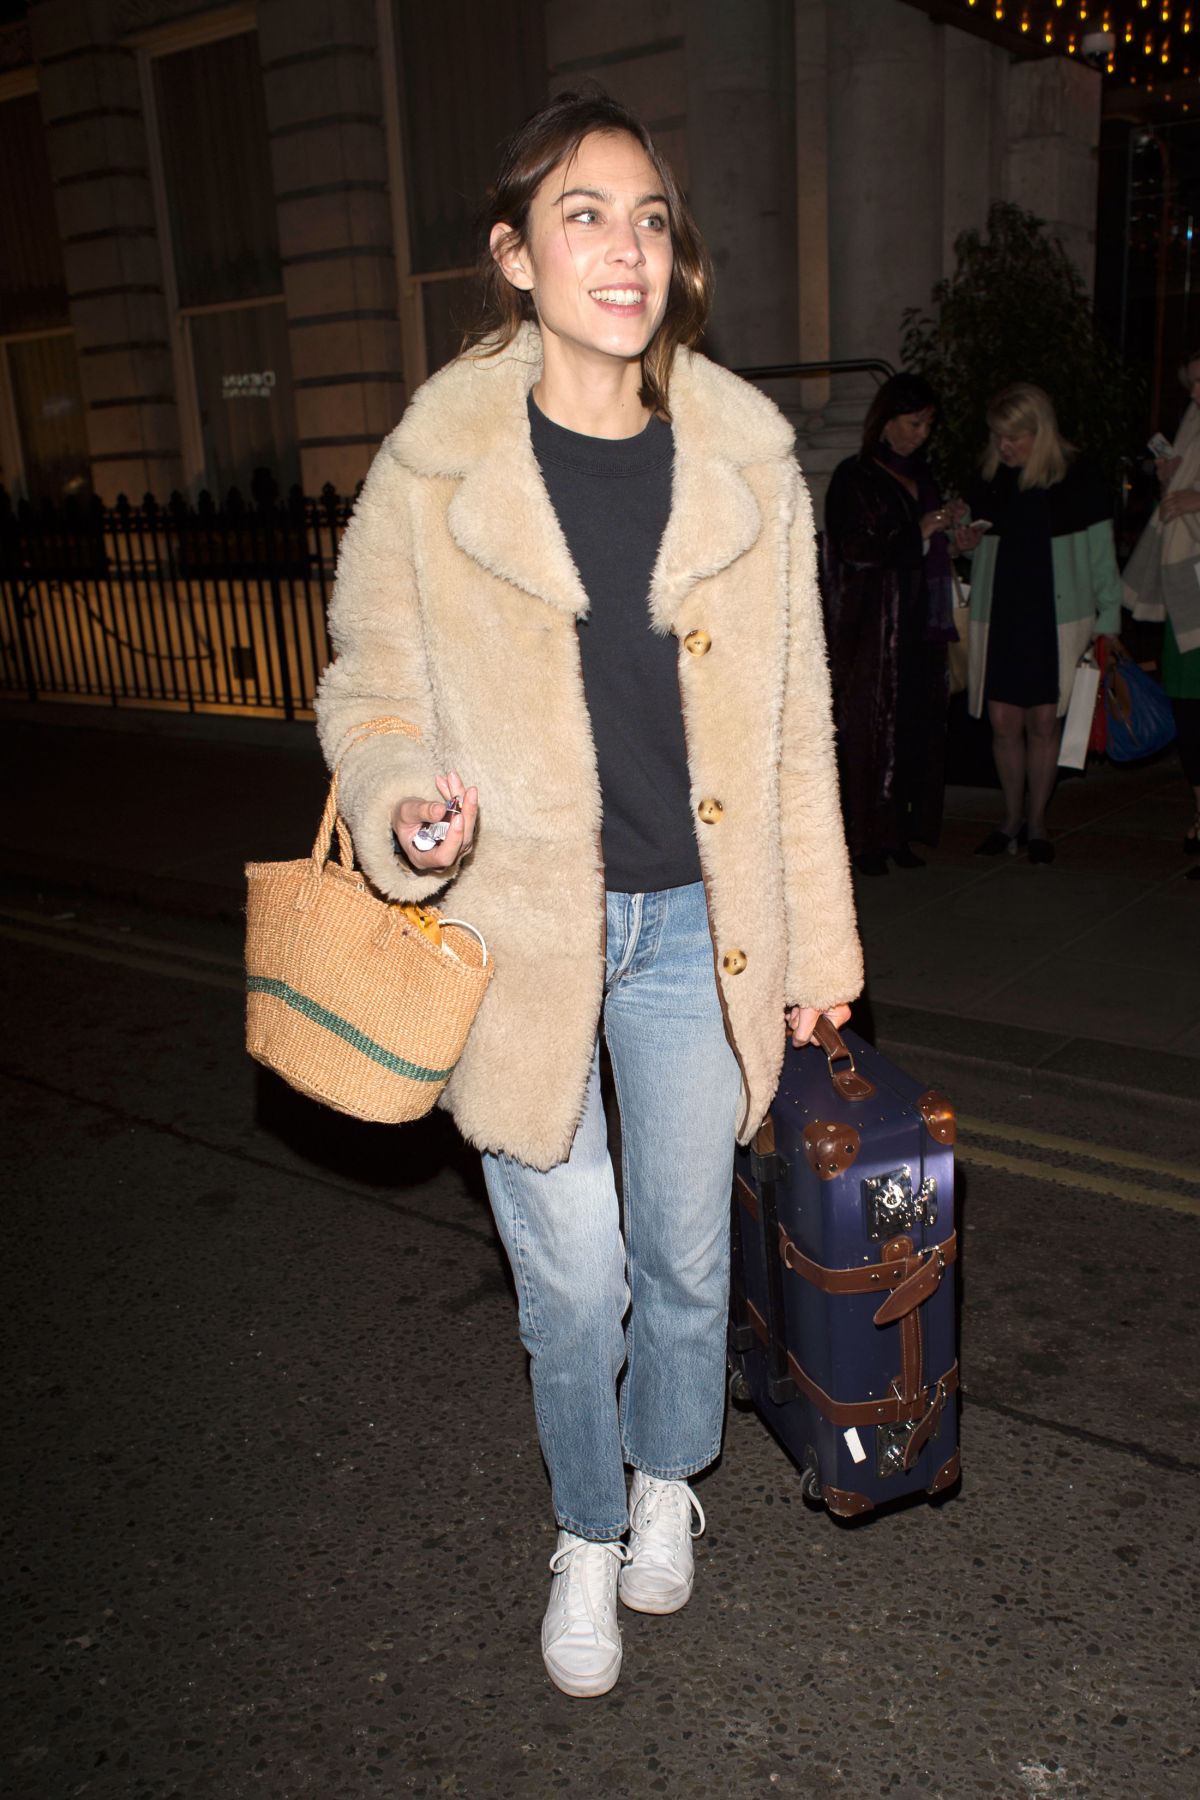 ALEXA CHUNG Leaves Her Hotel in London 02/18/2017 – HawtCelebs